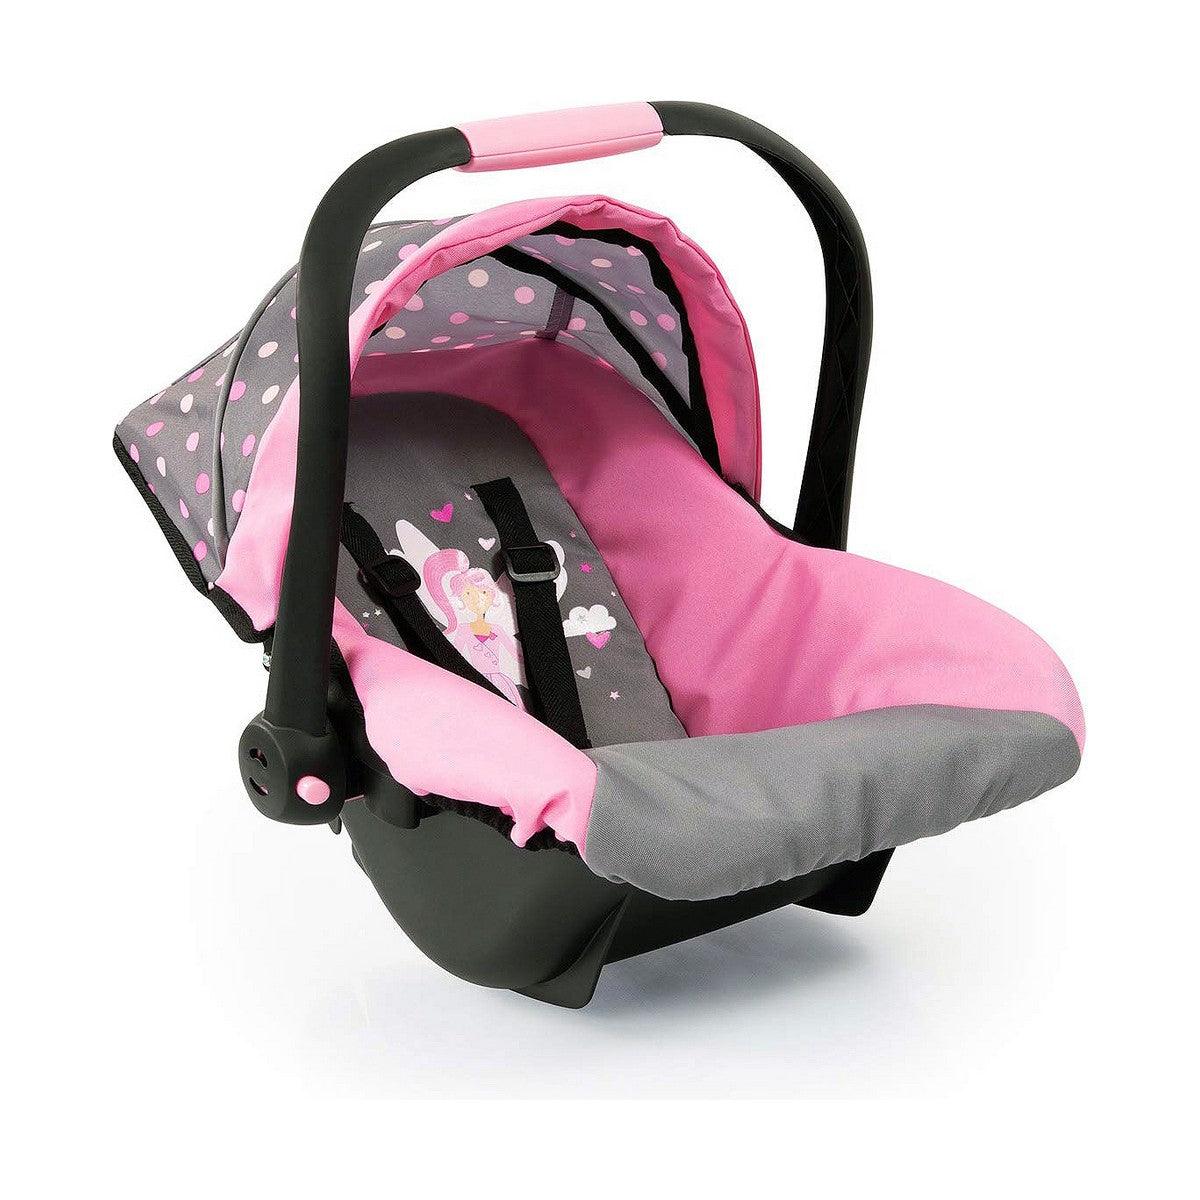 Chair for Dolls Reig Deluxe Grey Car Pink - VirtuousWares:Global